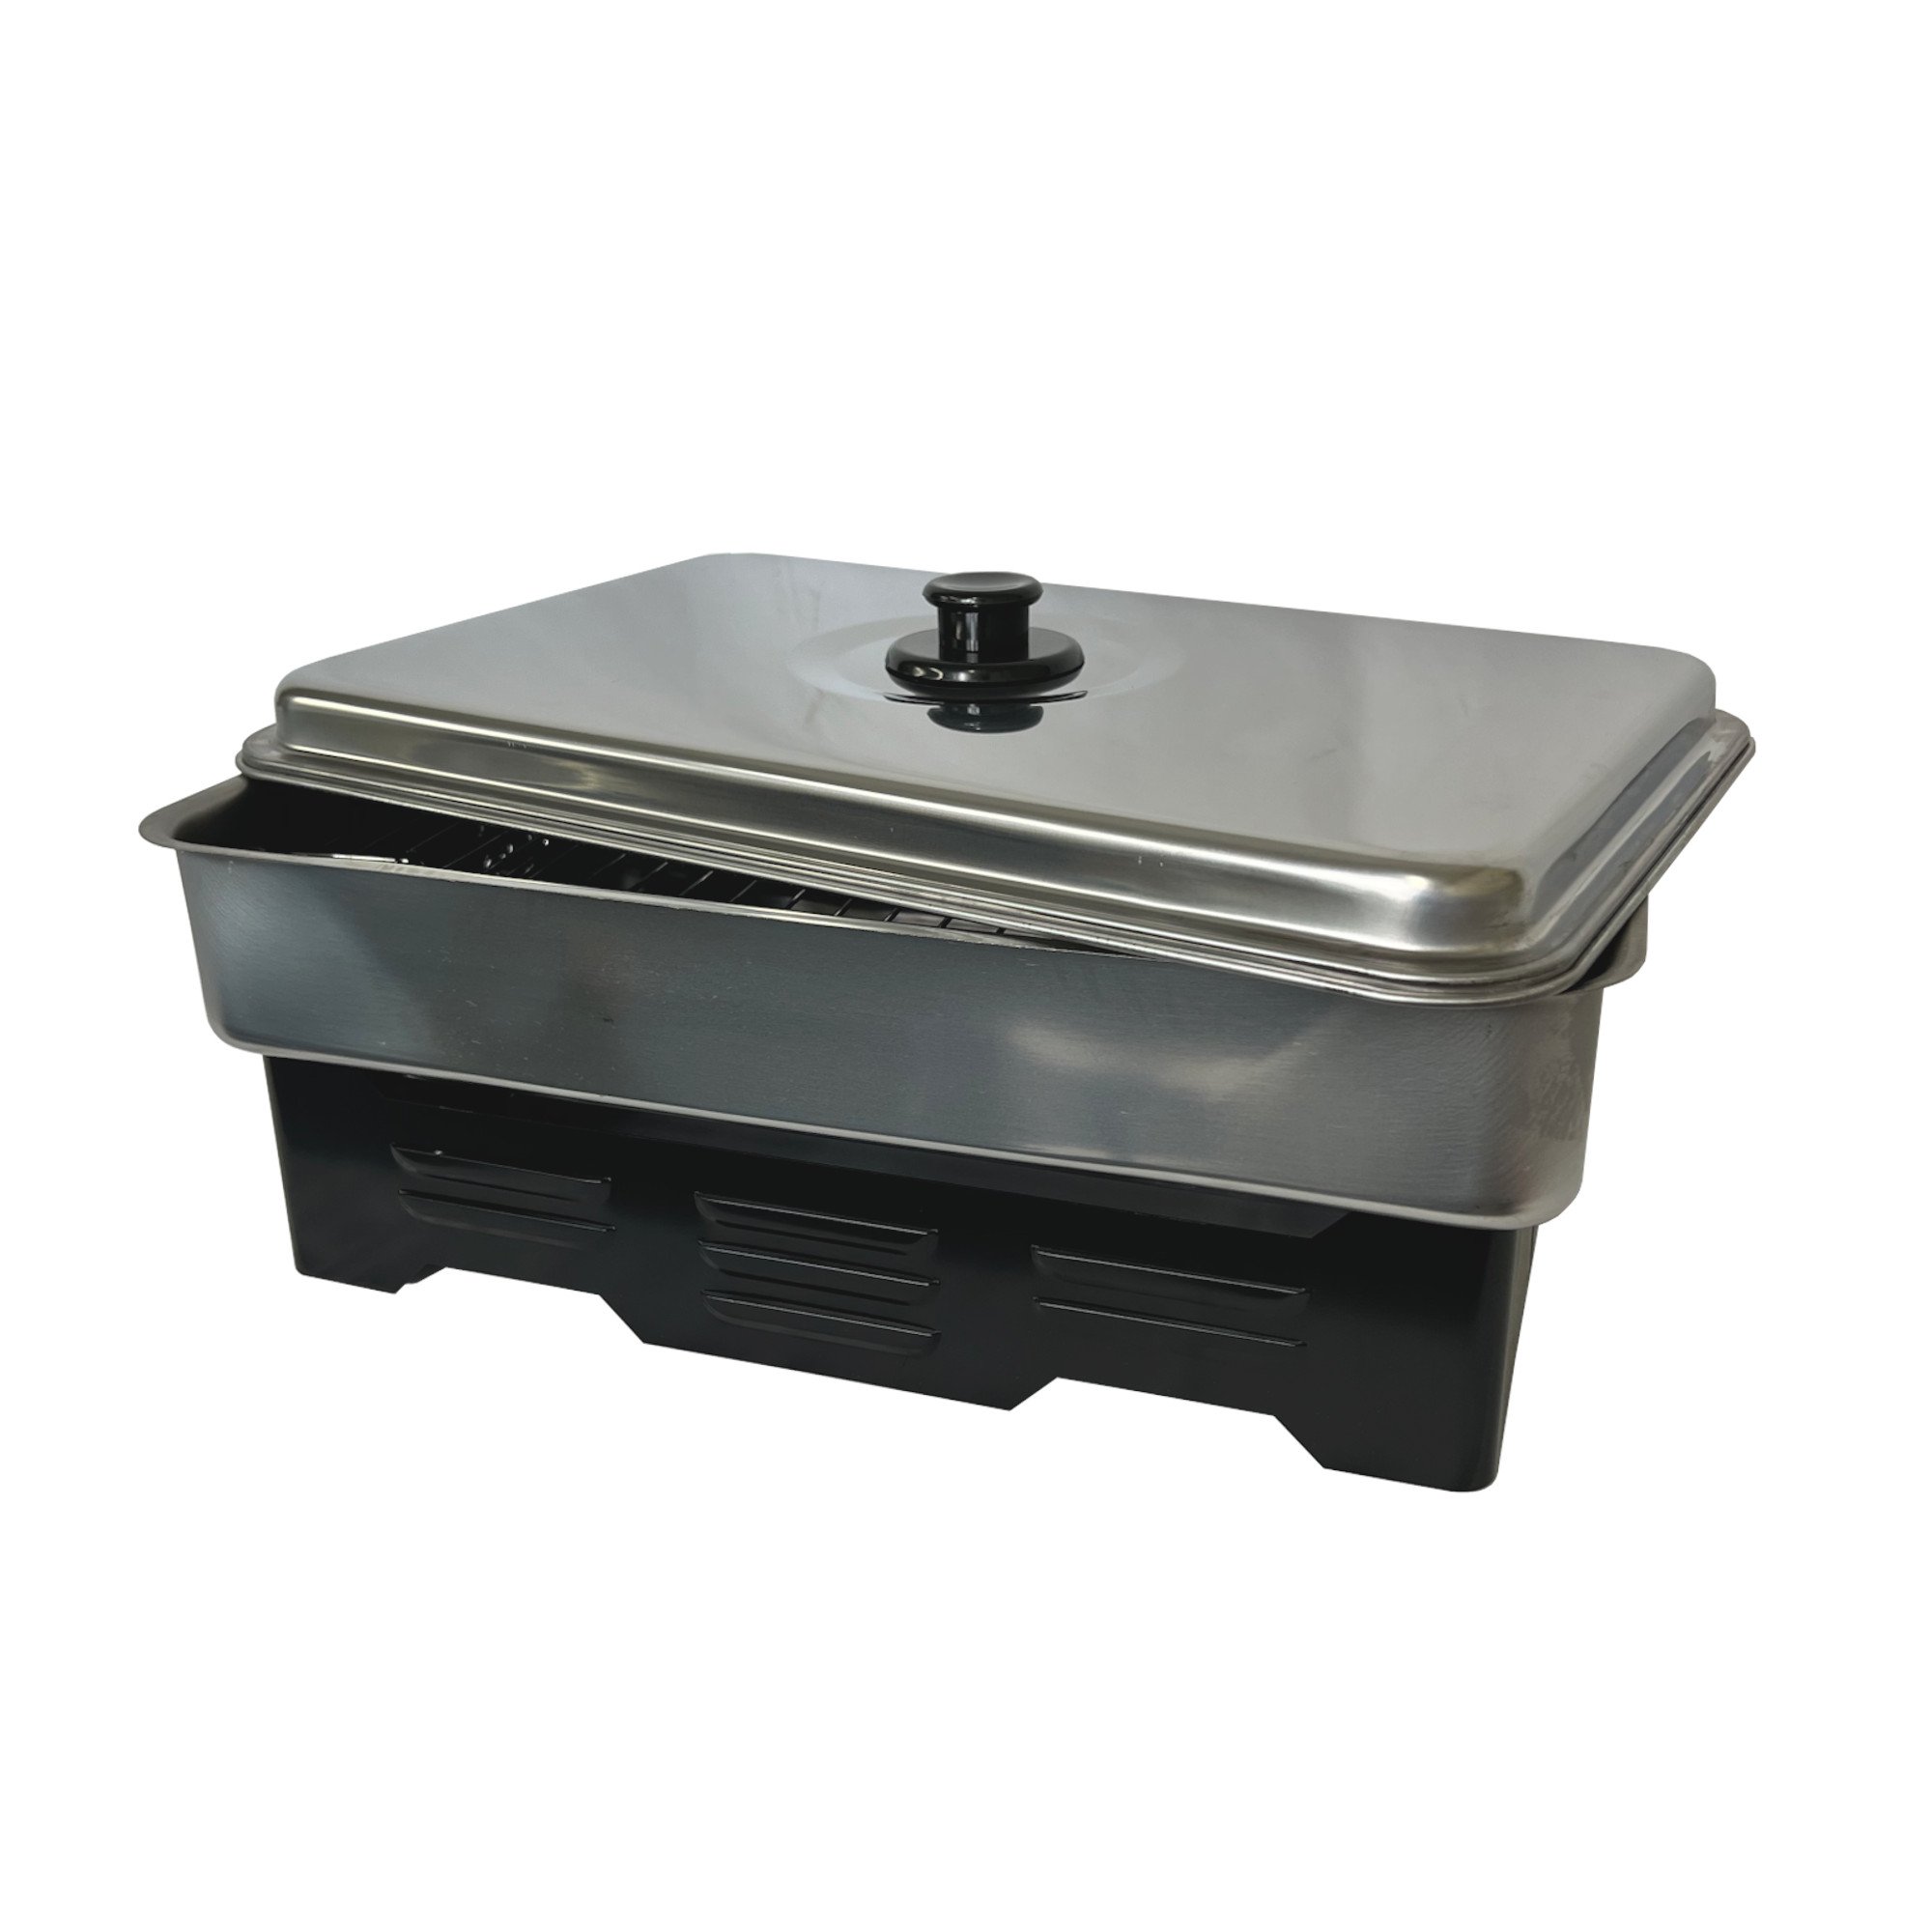 Outdoor Camping Smoker Cooker For Wood Chips Fish Meat & Cooking